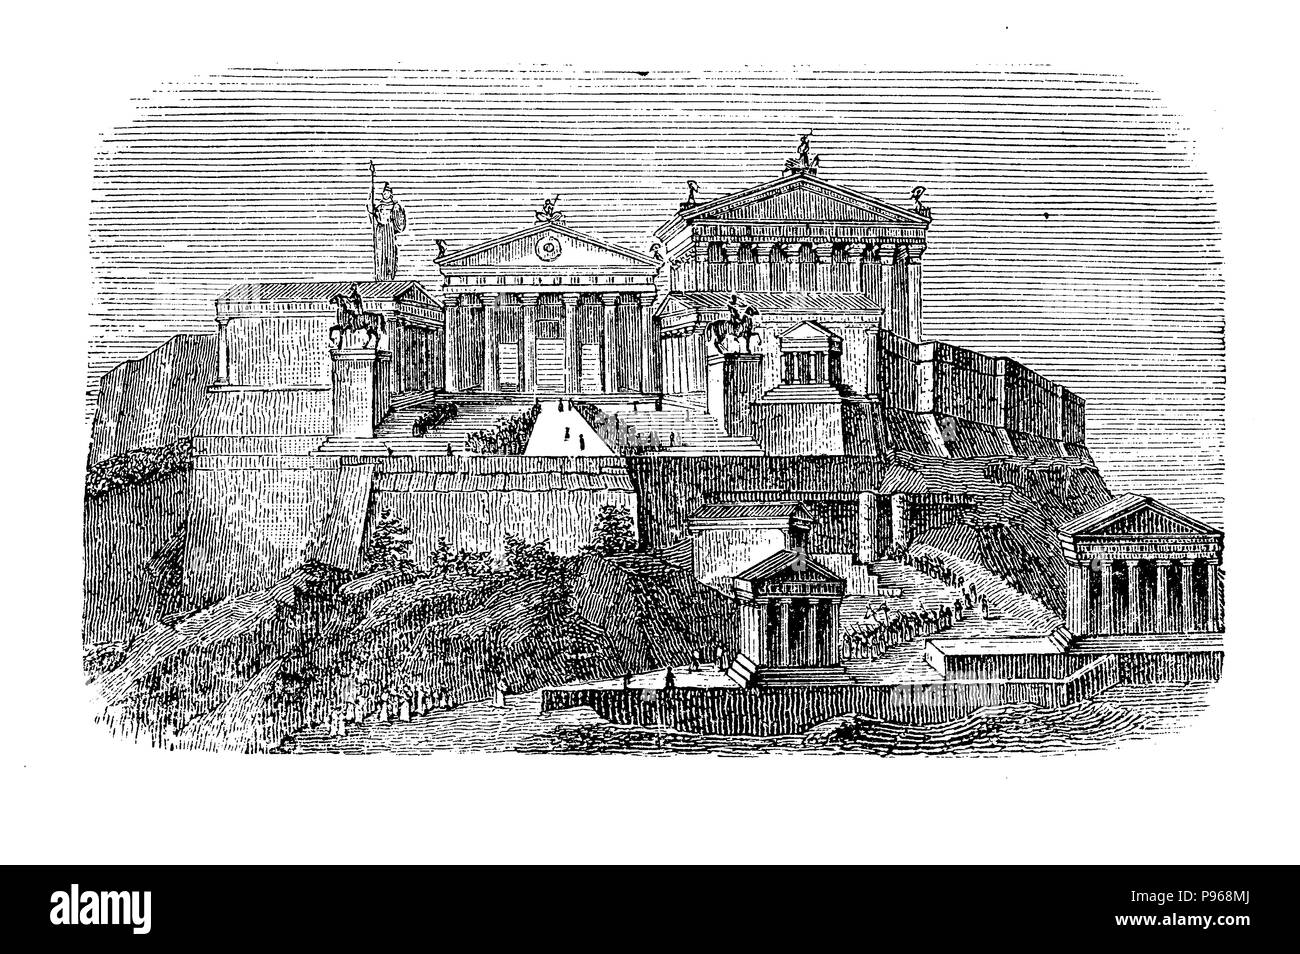 Vintage engraving describing how could have been the Acropolis of Athens in the antique times, not damaged over the course of centuries. Stock Photo